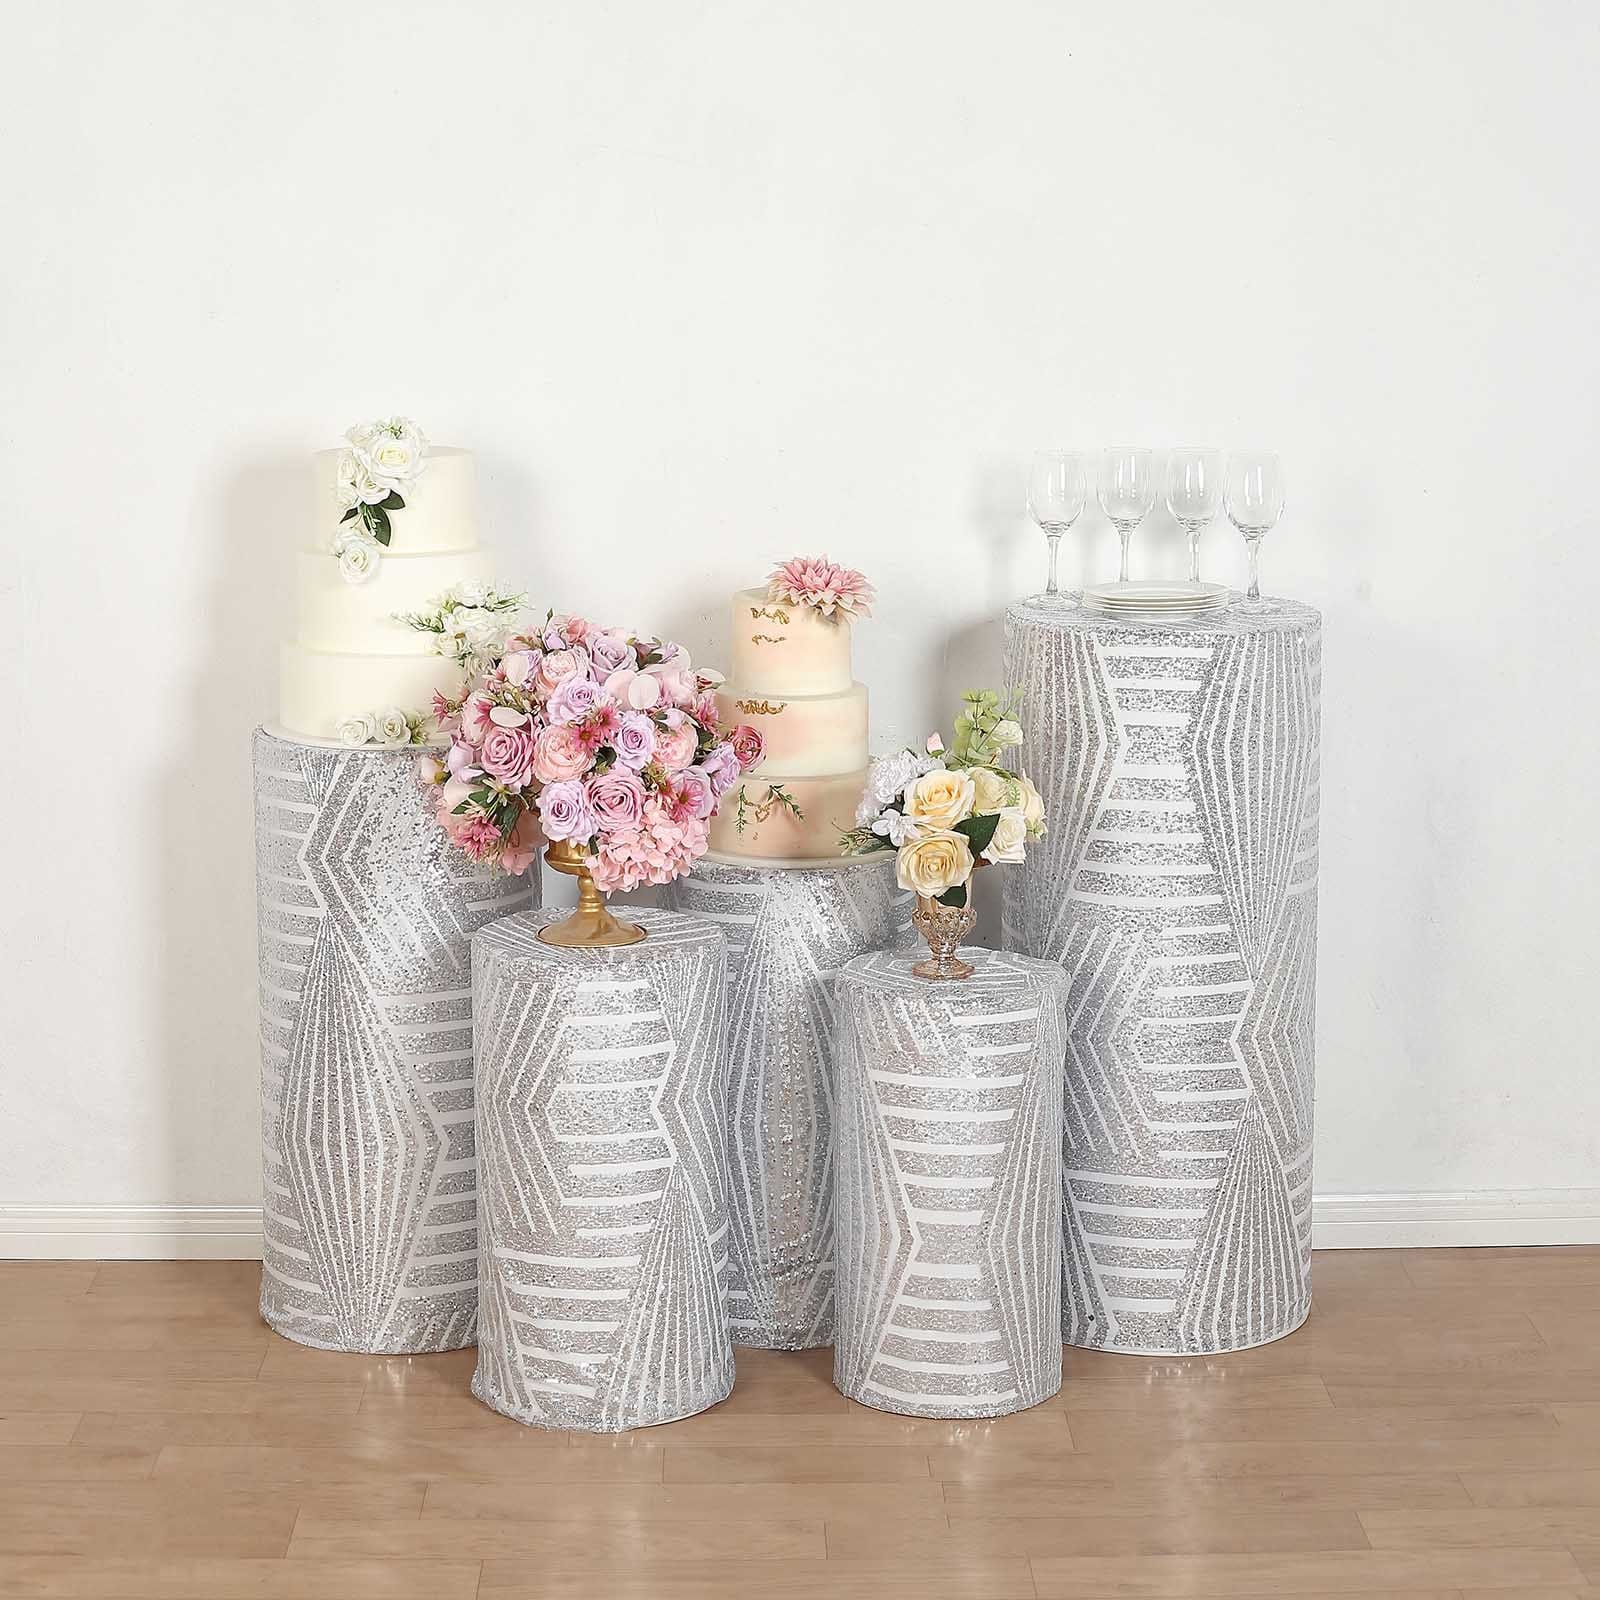 5 Cylinder Pedestal Mesh with Geometric Embroidered Sequins Display Stand Covers Set